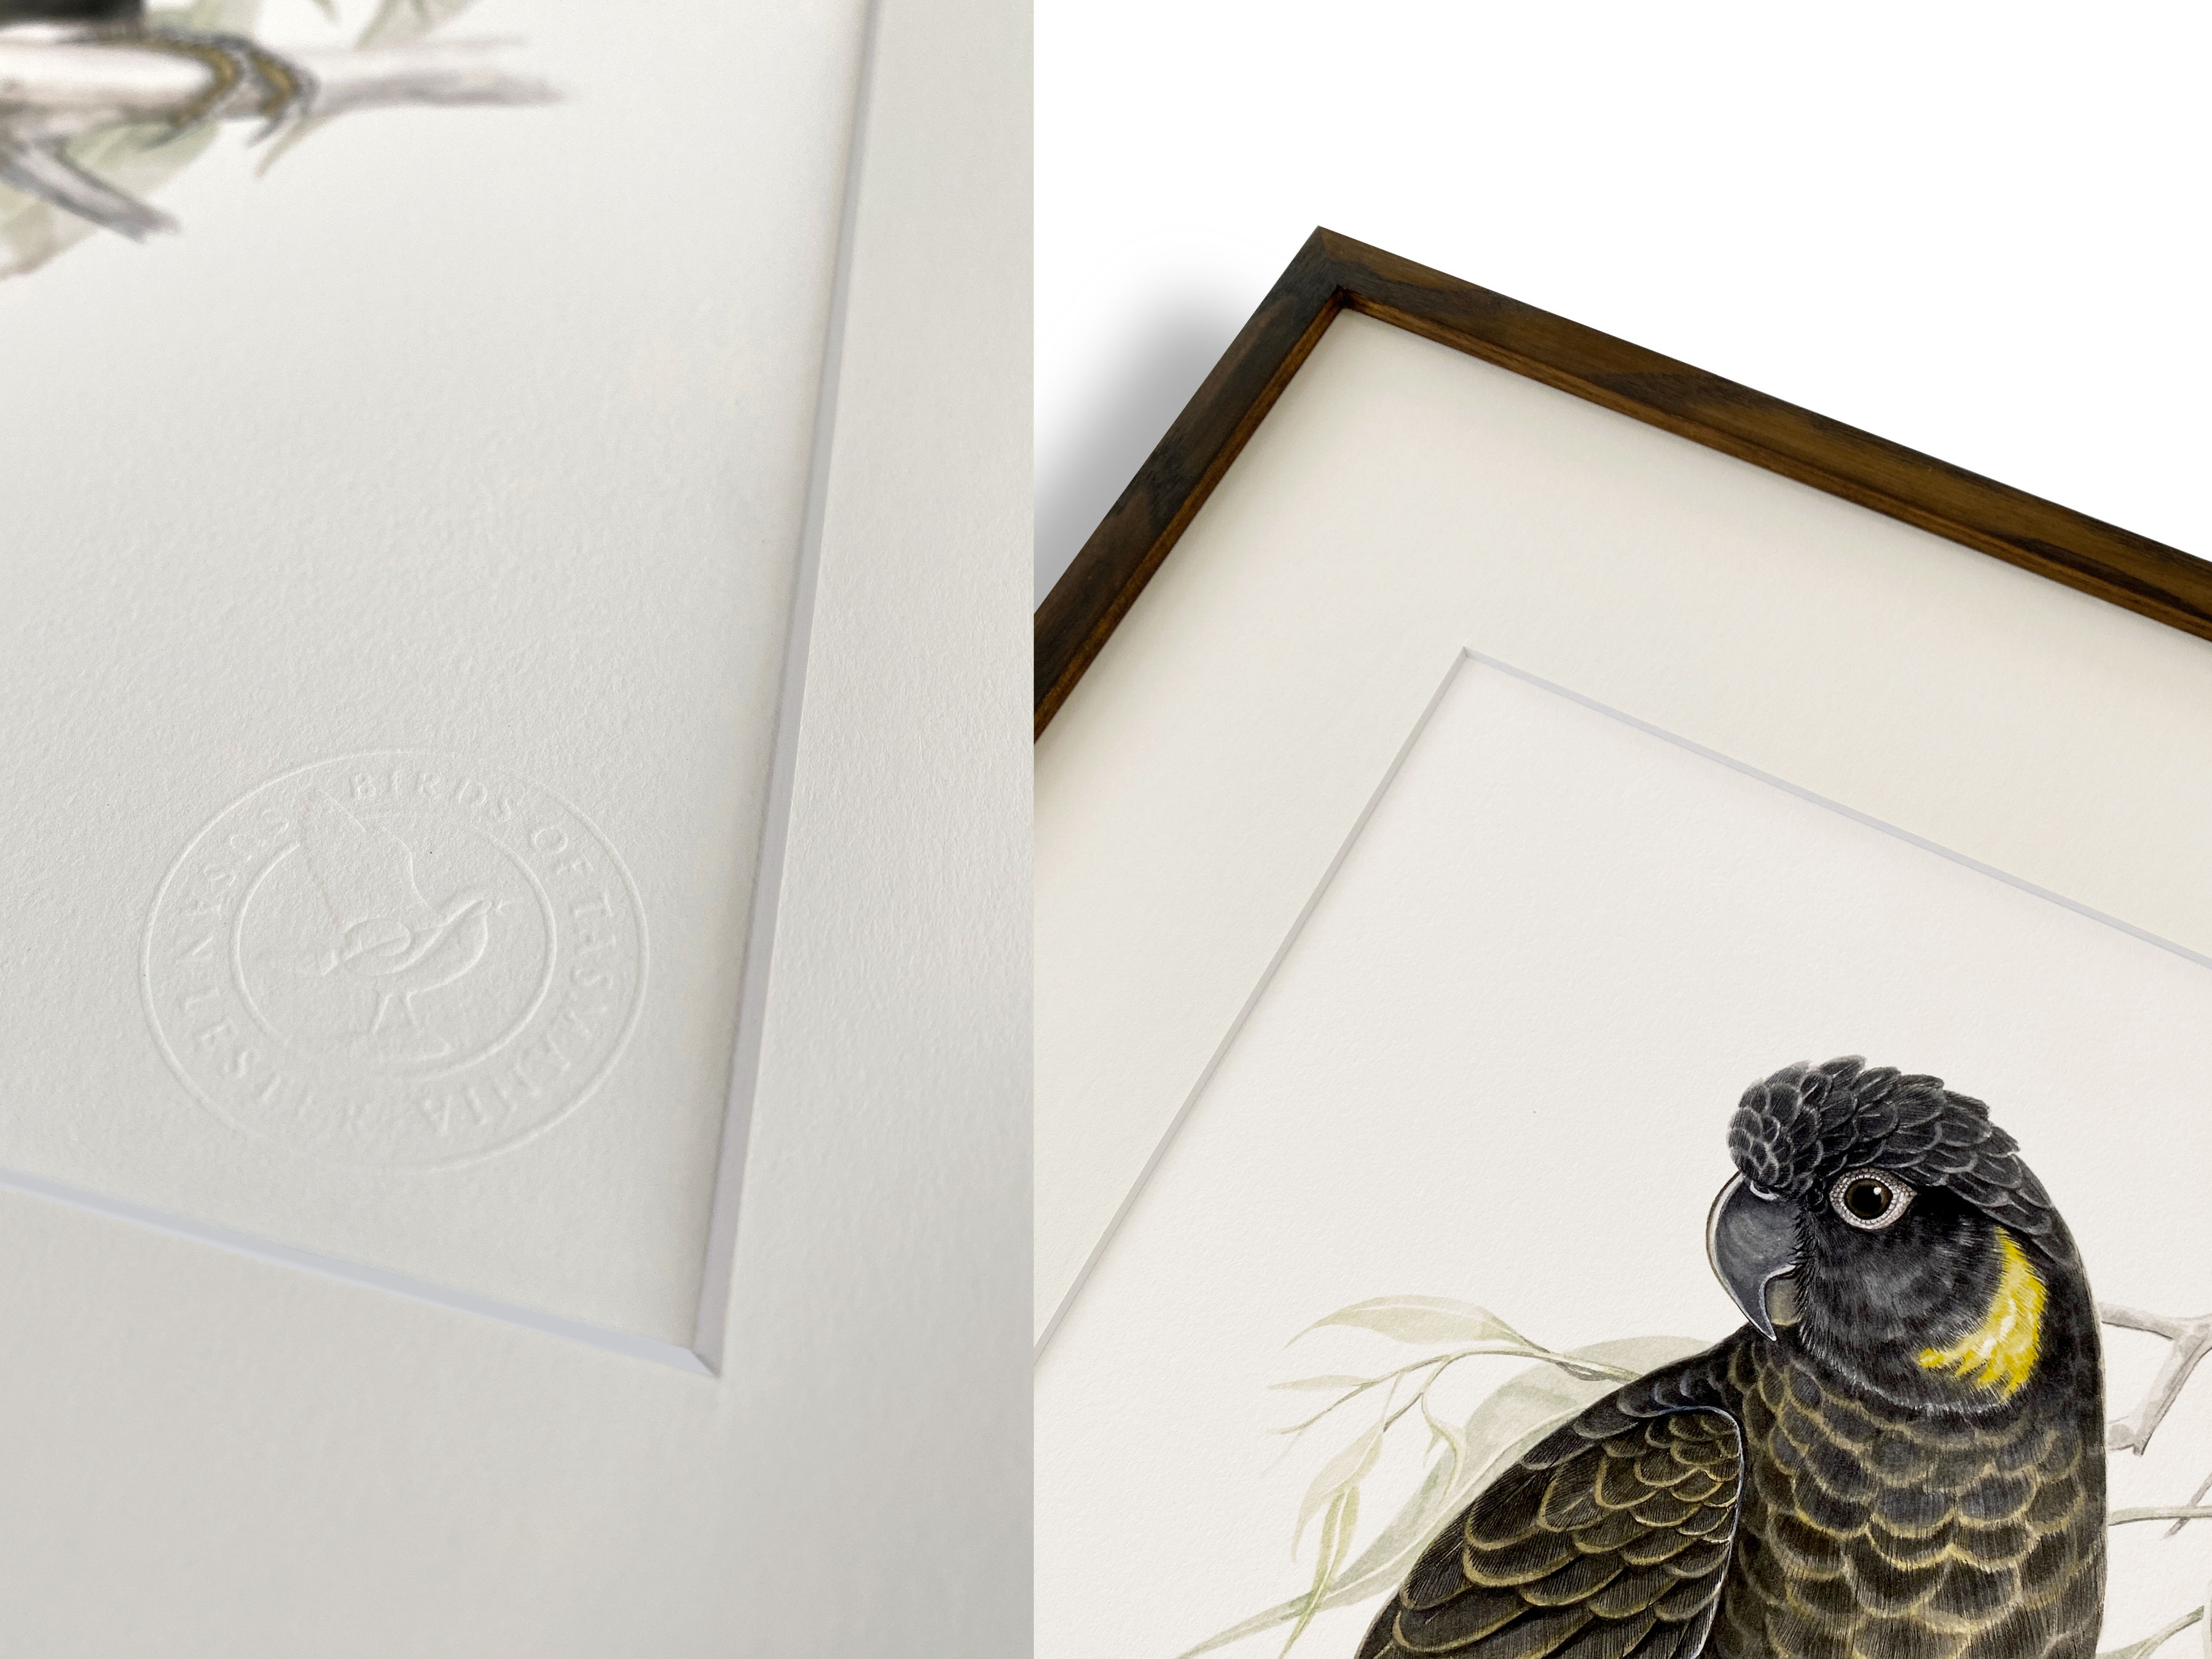 A composite image showing the Birds of Tasmania embossed seal and a detail of a framed print with a Yellow-tailed Black Cockatoo.